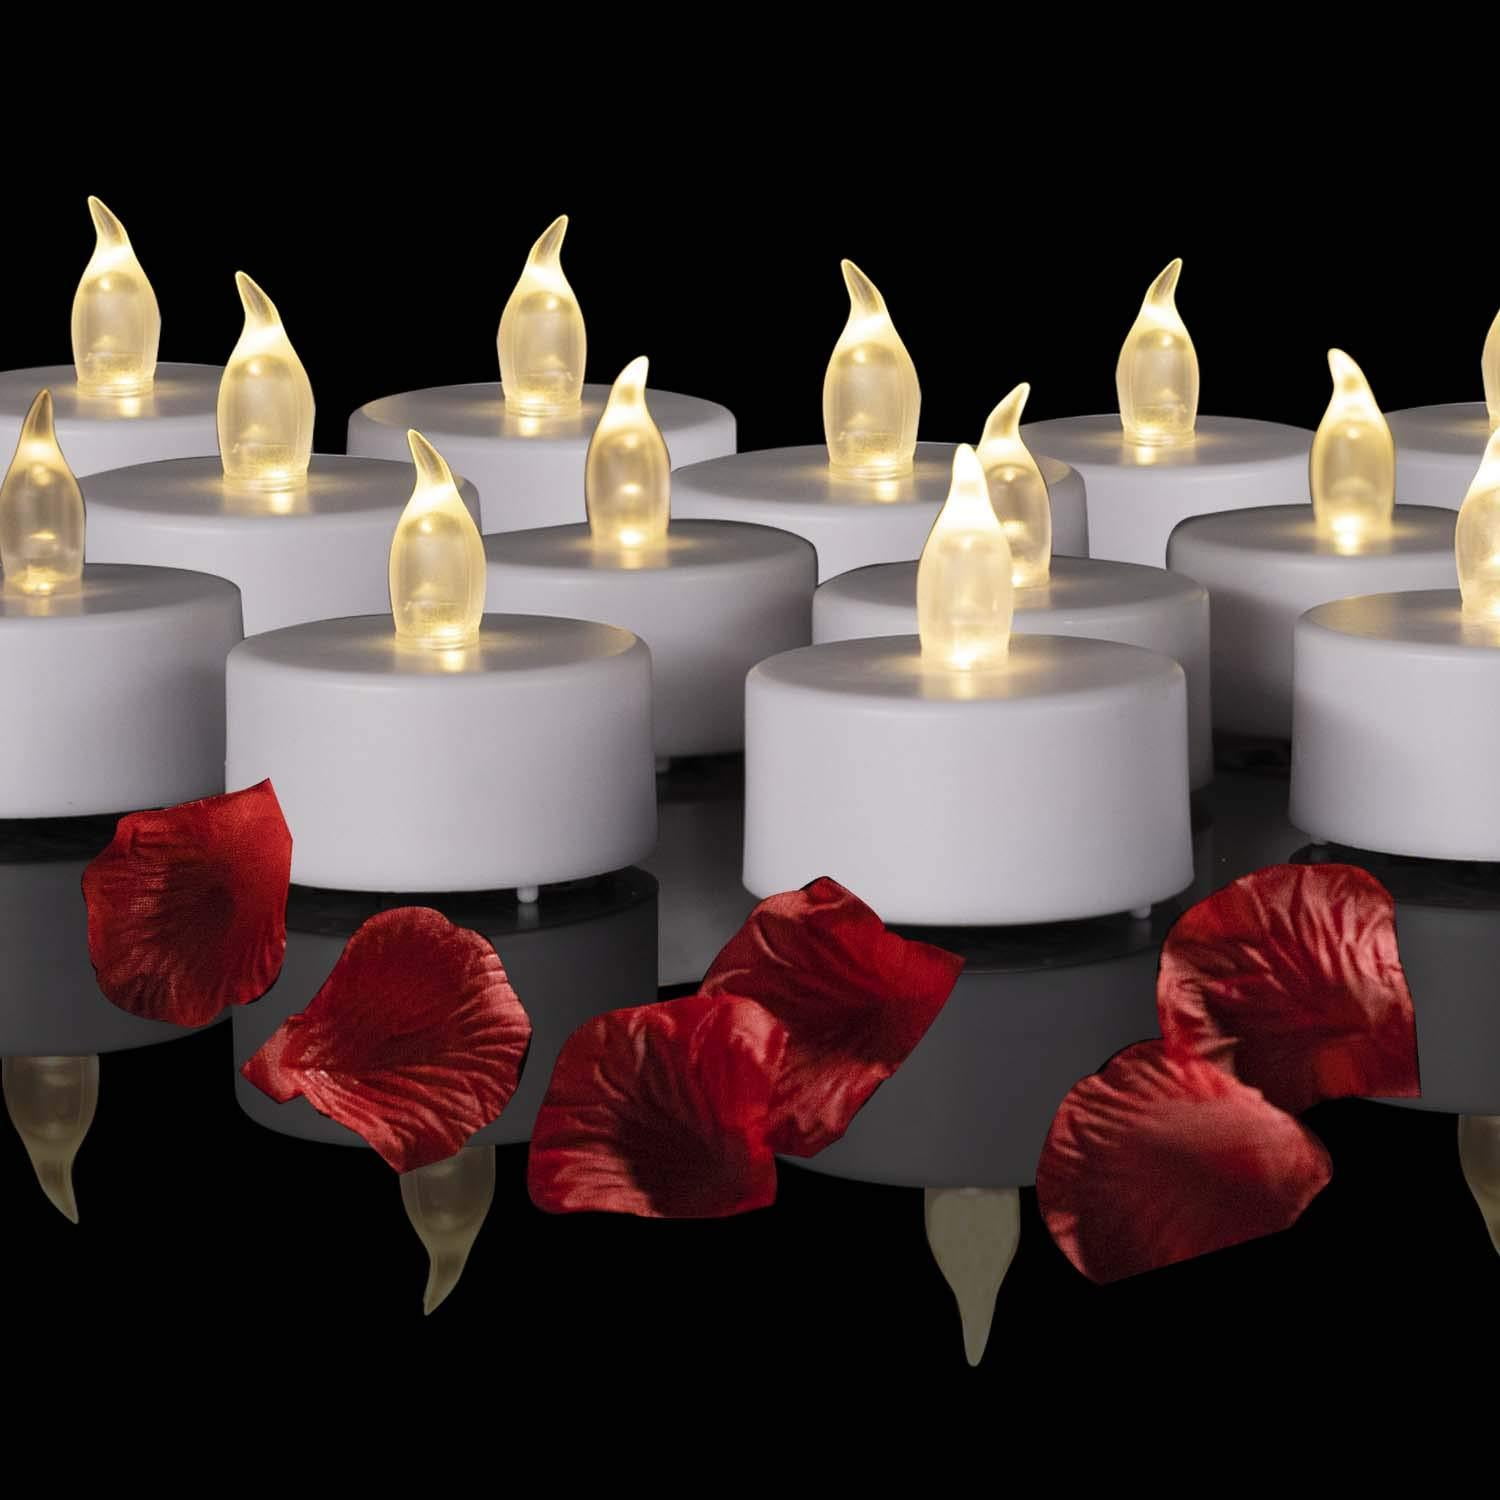 Merrynights 24-Pack Tea Lights Candles Battery Operated Bulk, Long-Lasting  150 Hours Flameless Tealight Candles, Flickering Tea Lights for Halloween